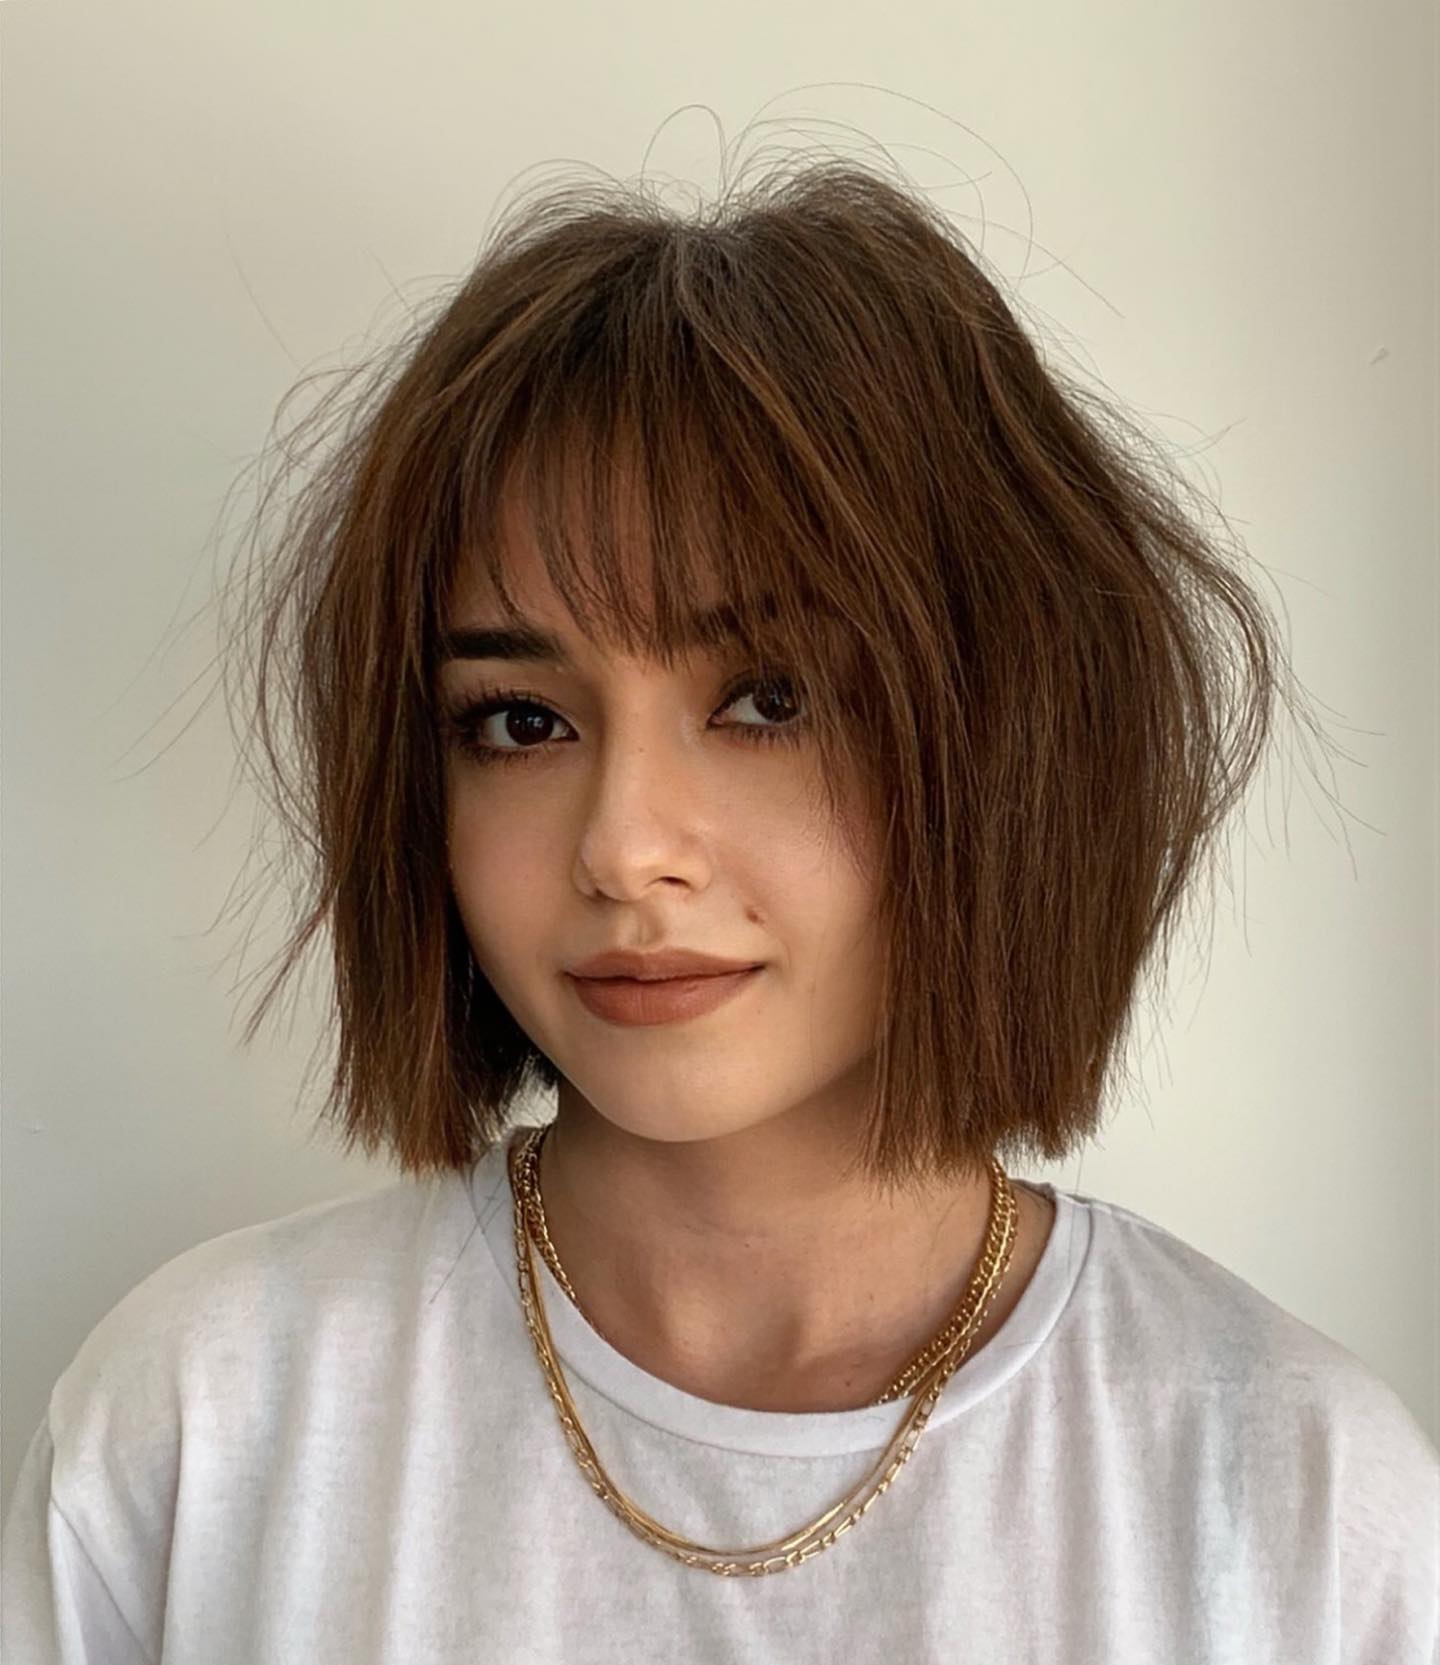 46 Stylish Short Hair with Bangs Ideas for a Trendy Look